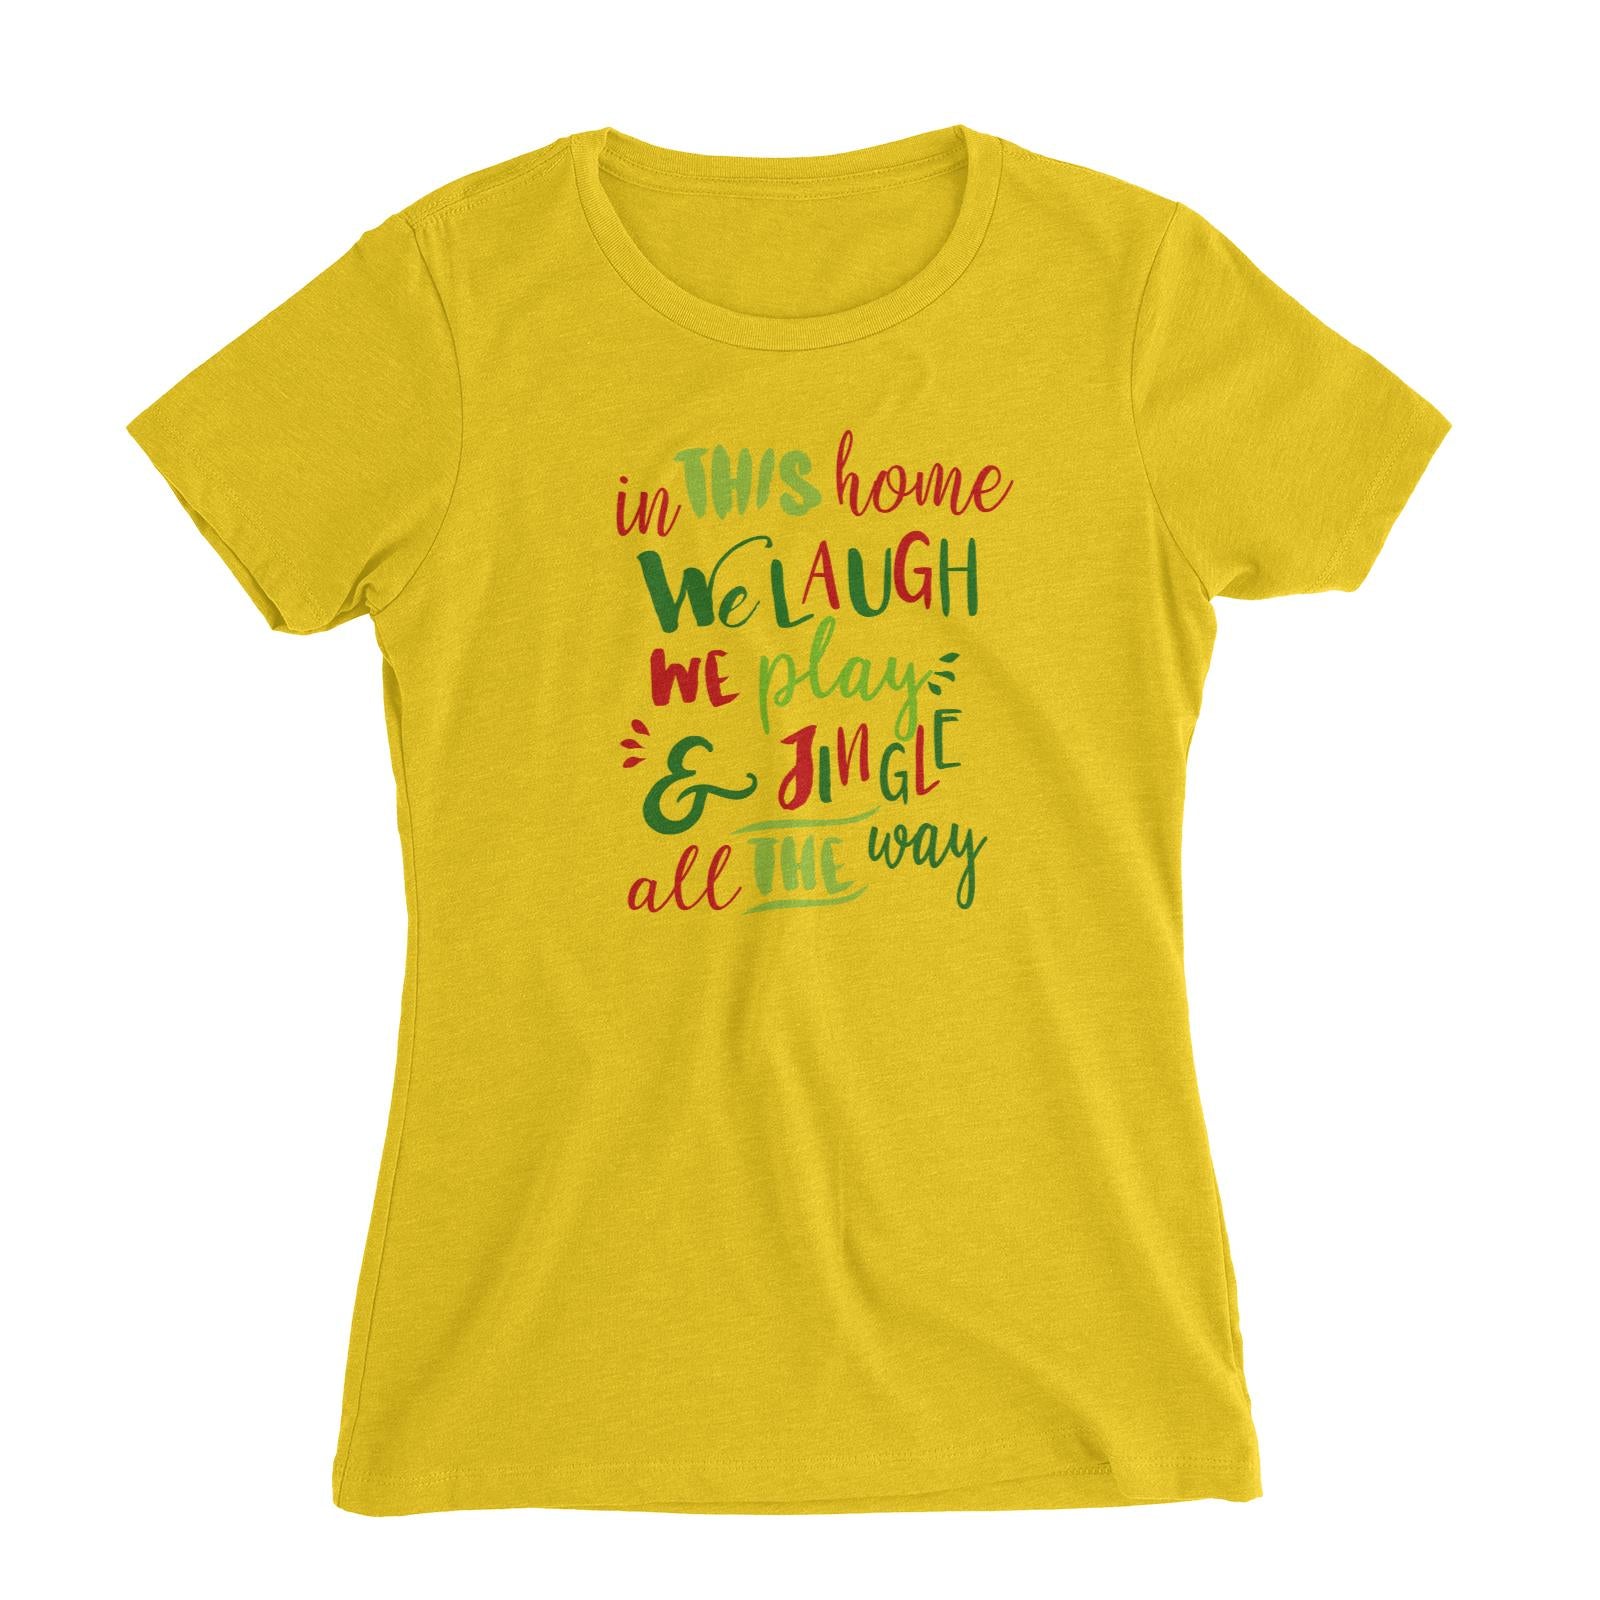 In This Home We Laugh, We Play & Jingle All The Way Lettering Women's Slim Fit T-Shirt Christmas Matching Family